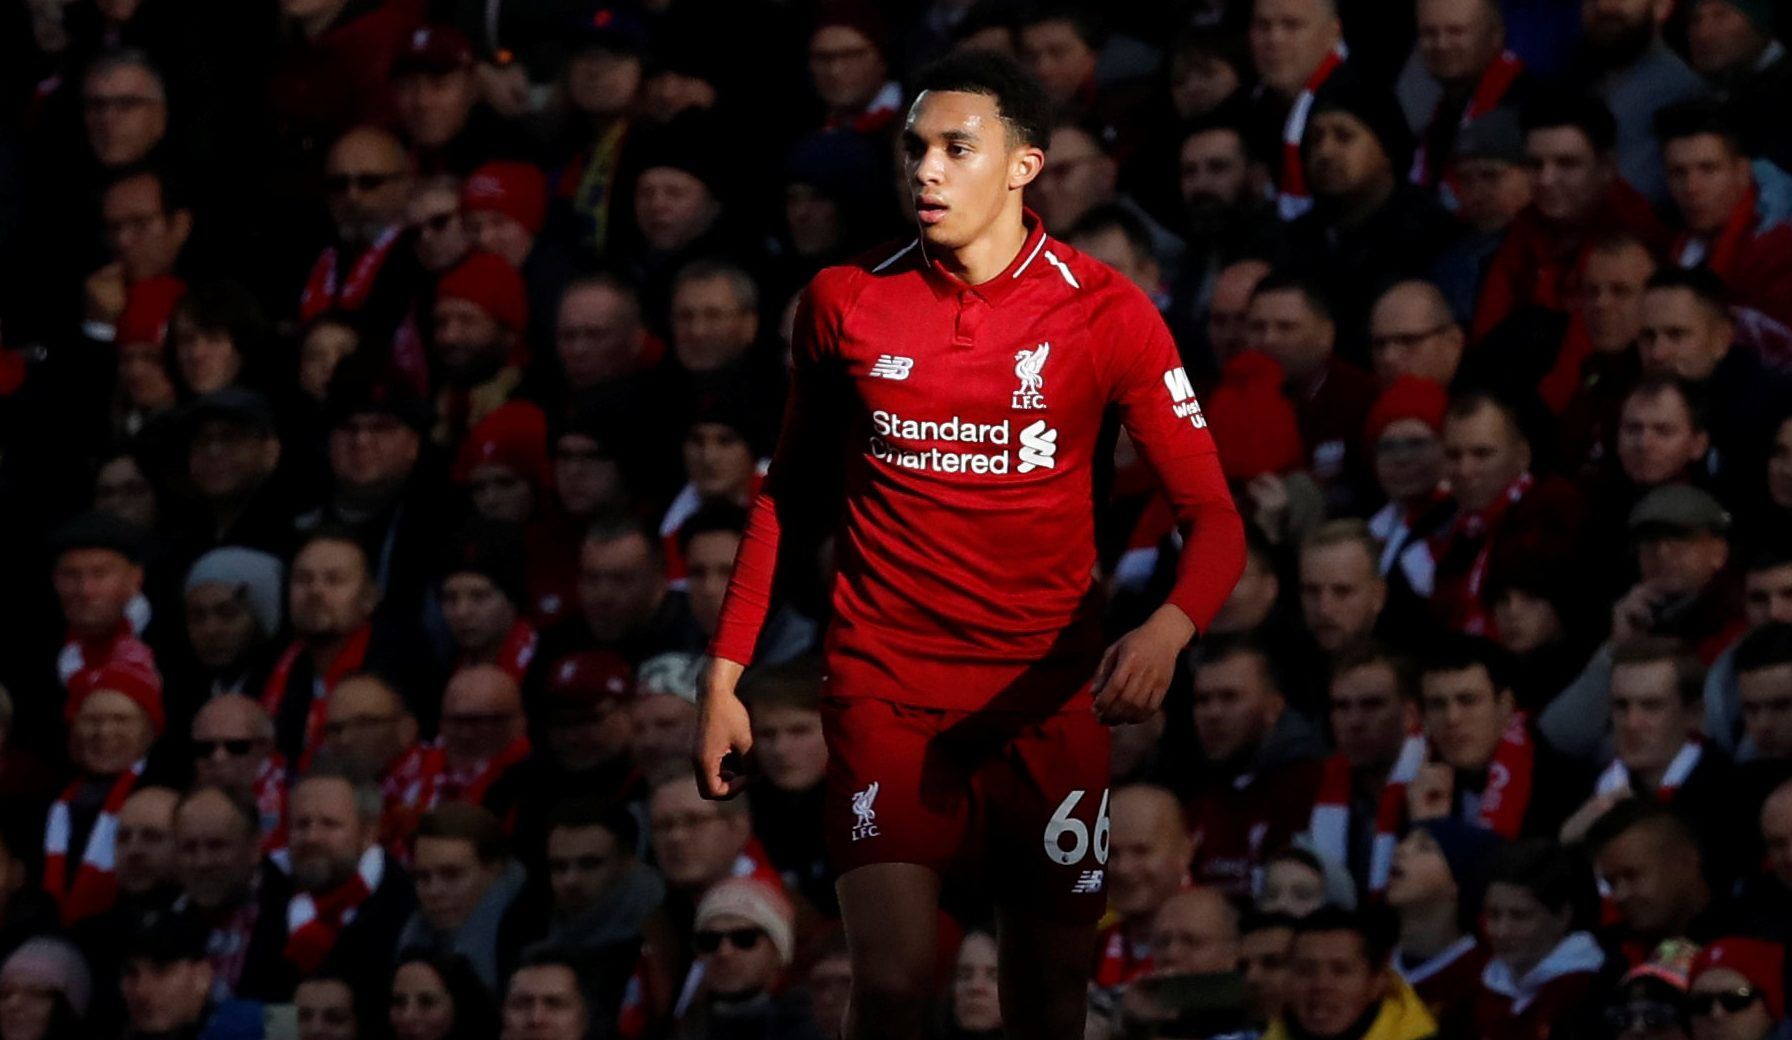 Soccer Football - Premier League - Liverpool v Cardiff City - Anfield, Liverpool, Britain - October 27, 2018  Liverpool's Trent Alexander-Arnold during the match   REUTERS/Russell Cheyne  EDITORIAL USE ONLY. No use with unauthorized audio, video, data, fixture lists, club/league logos or 